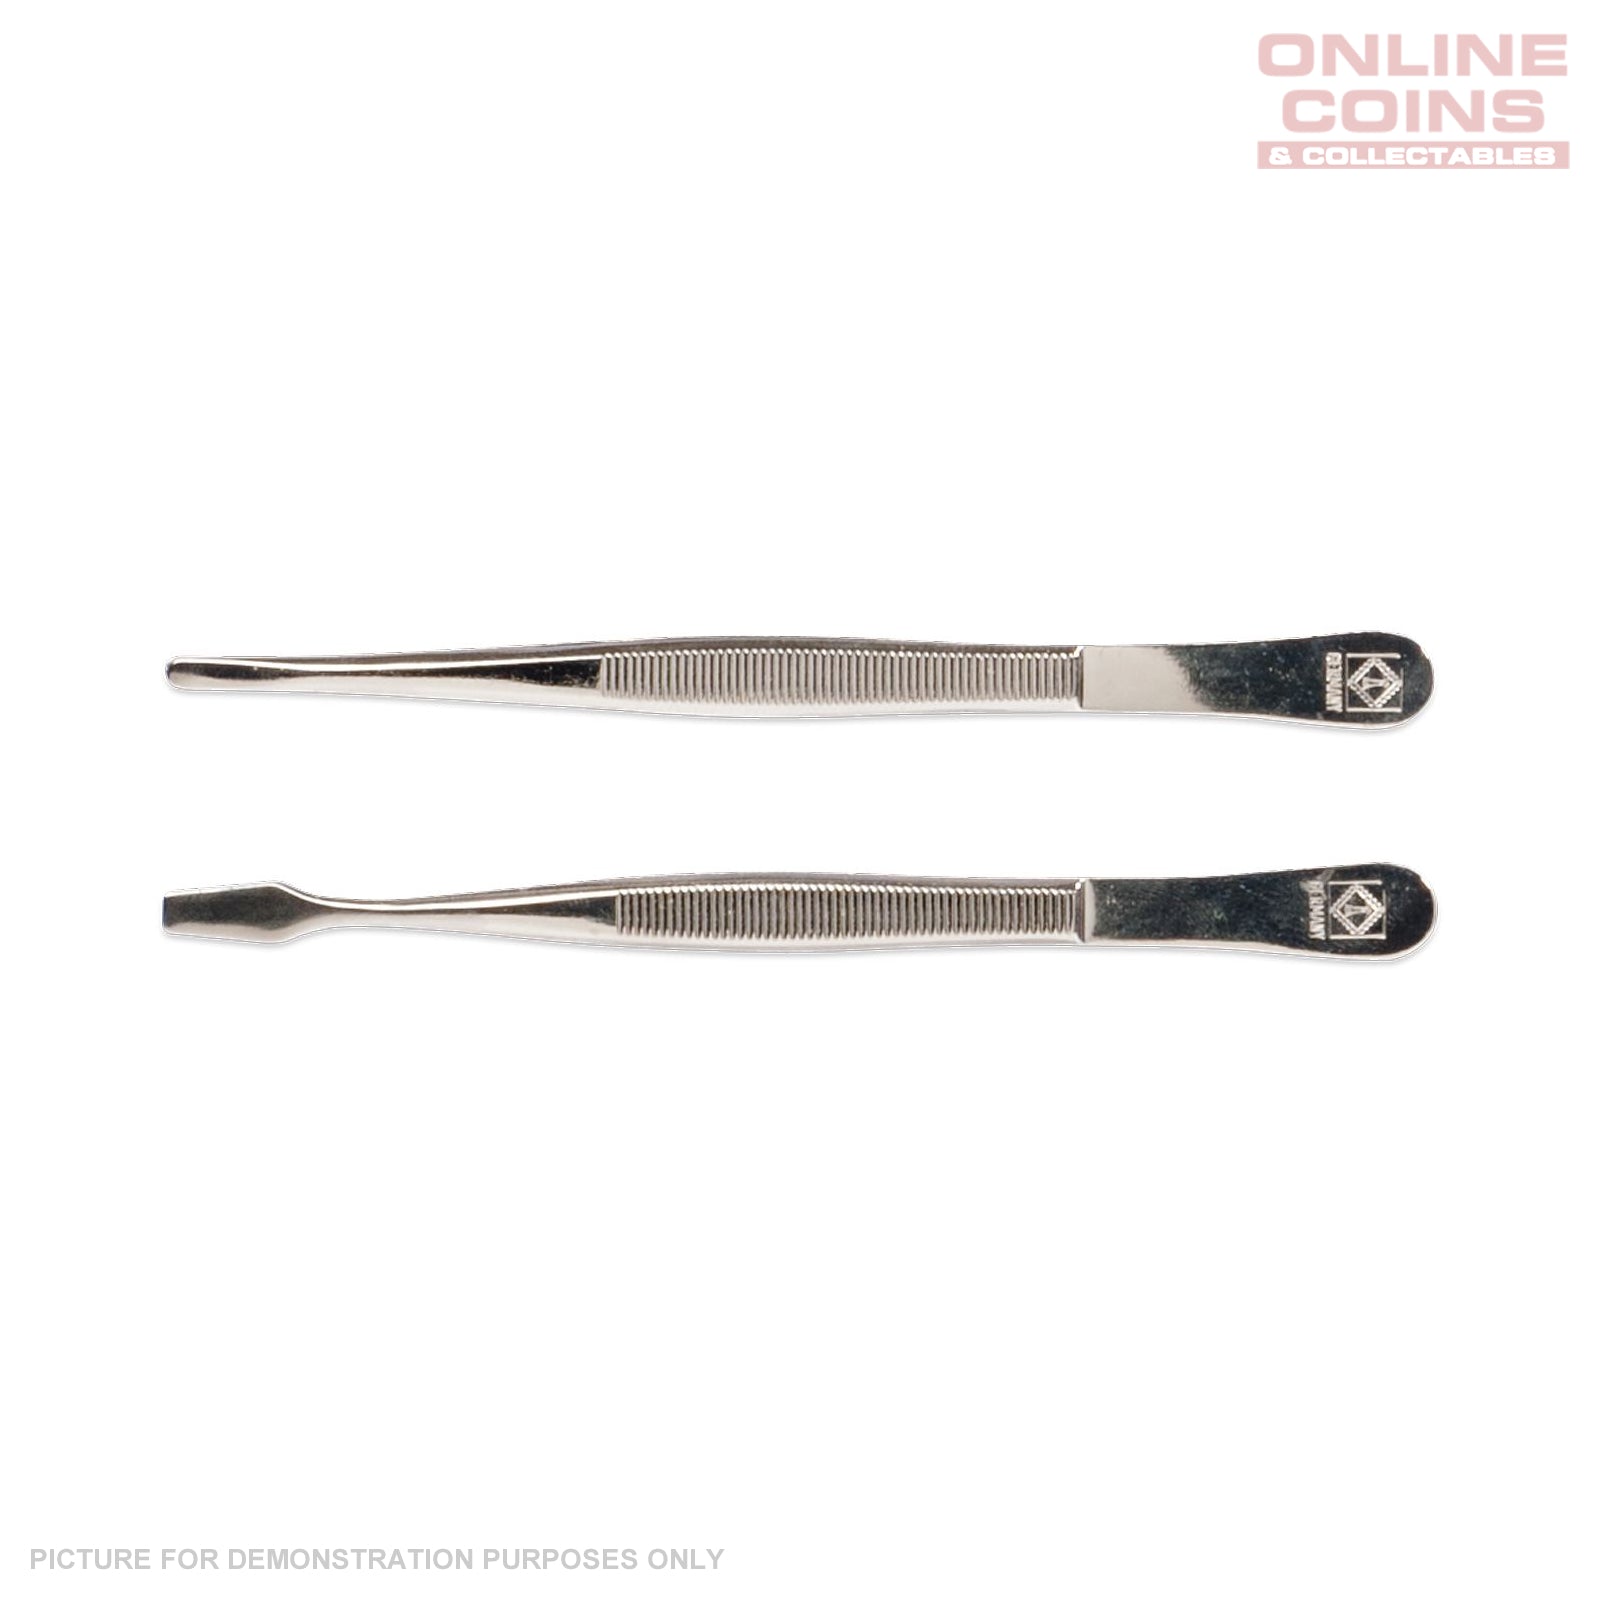 Lighthouse Stamp Tongs Tweezers 31 Deluxe 12 cm - Straight Pointed - PI-31